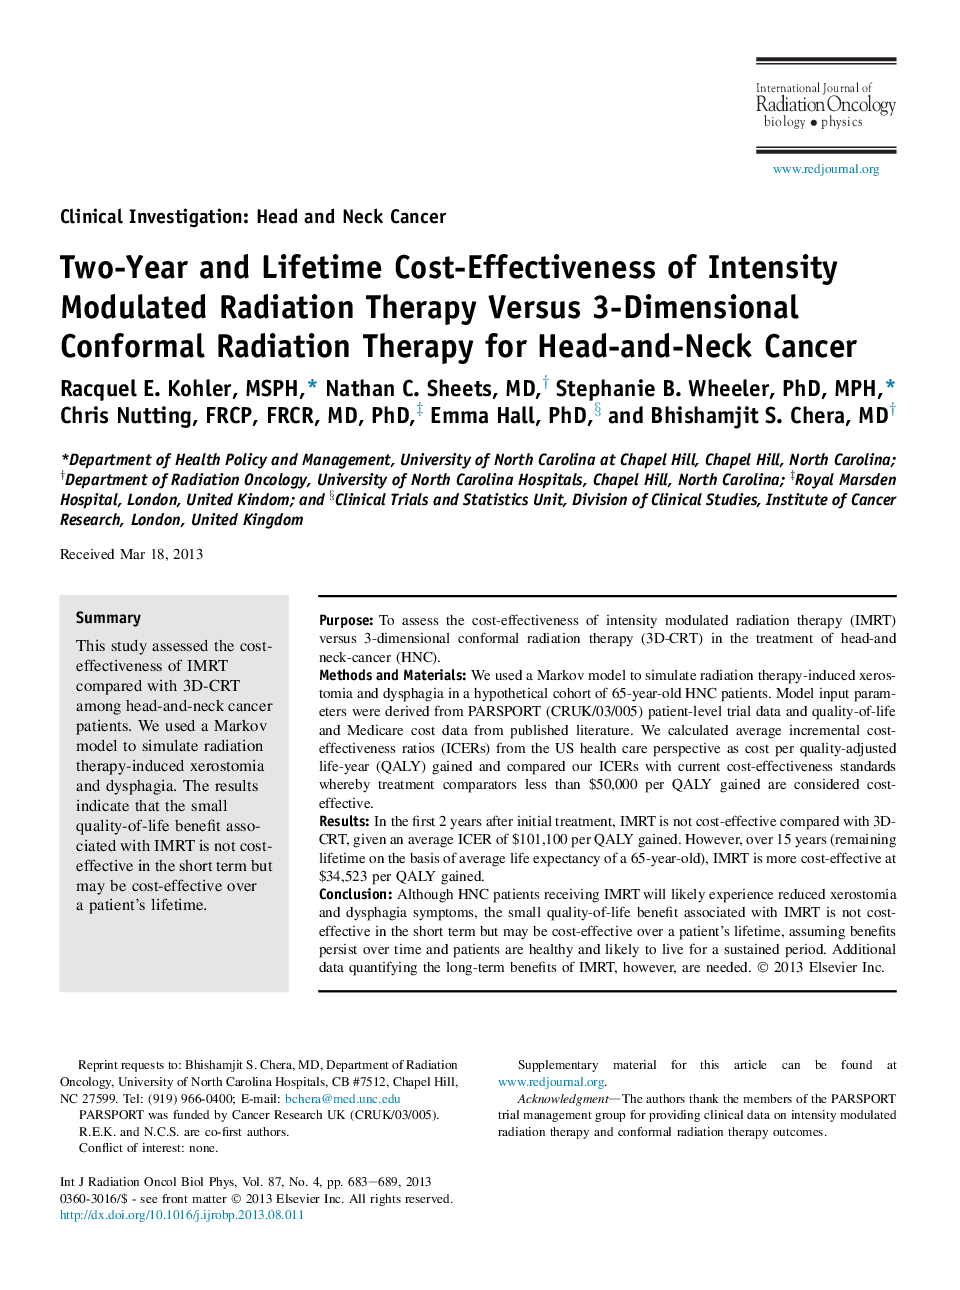 Two-Year and Lifetime Cost-Effectiveness of Intensity Modulated Radiation Therapy Versus 3-Dimensional Conformal Radiation Therapy for Head-and-Neck Cancer